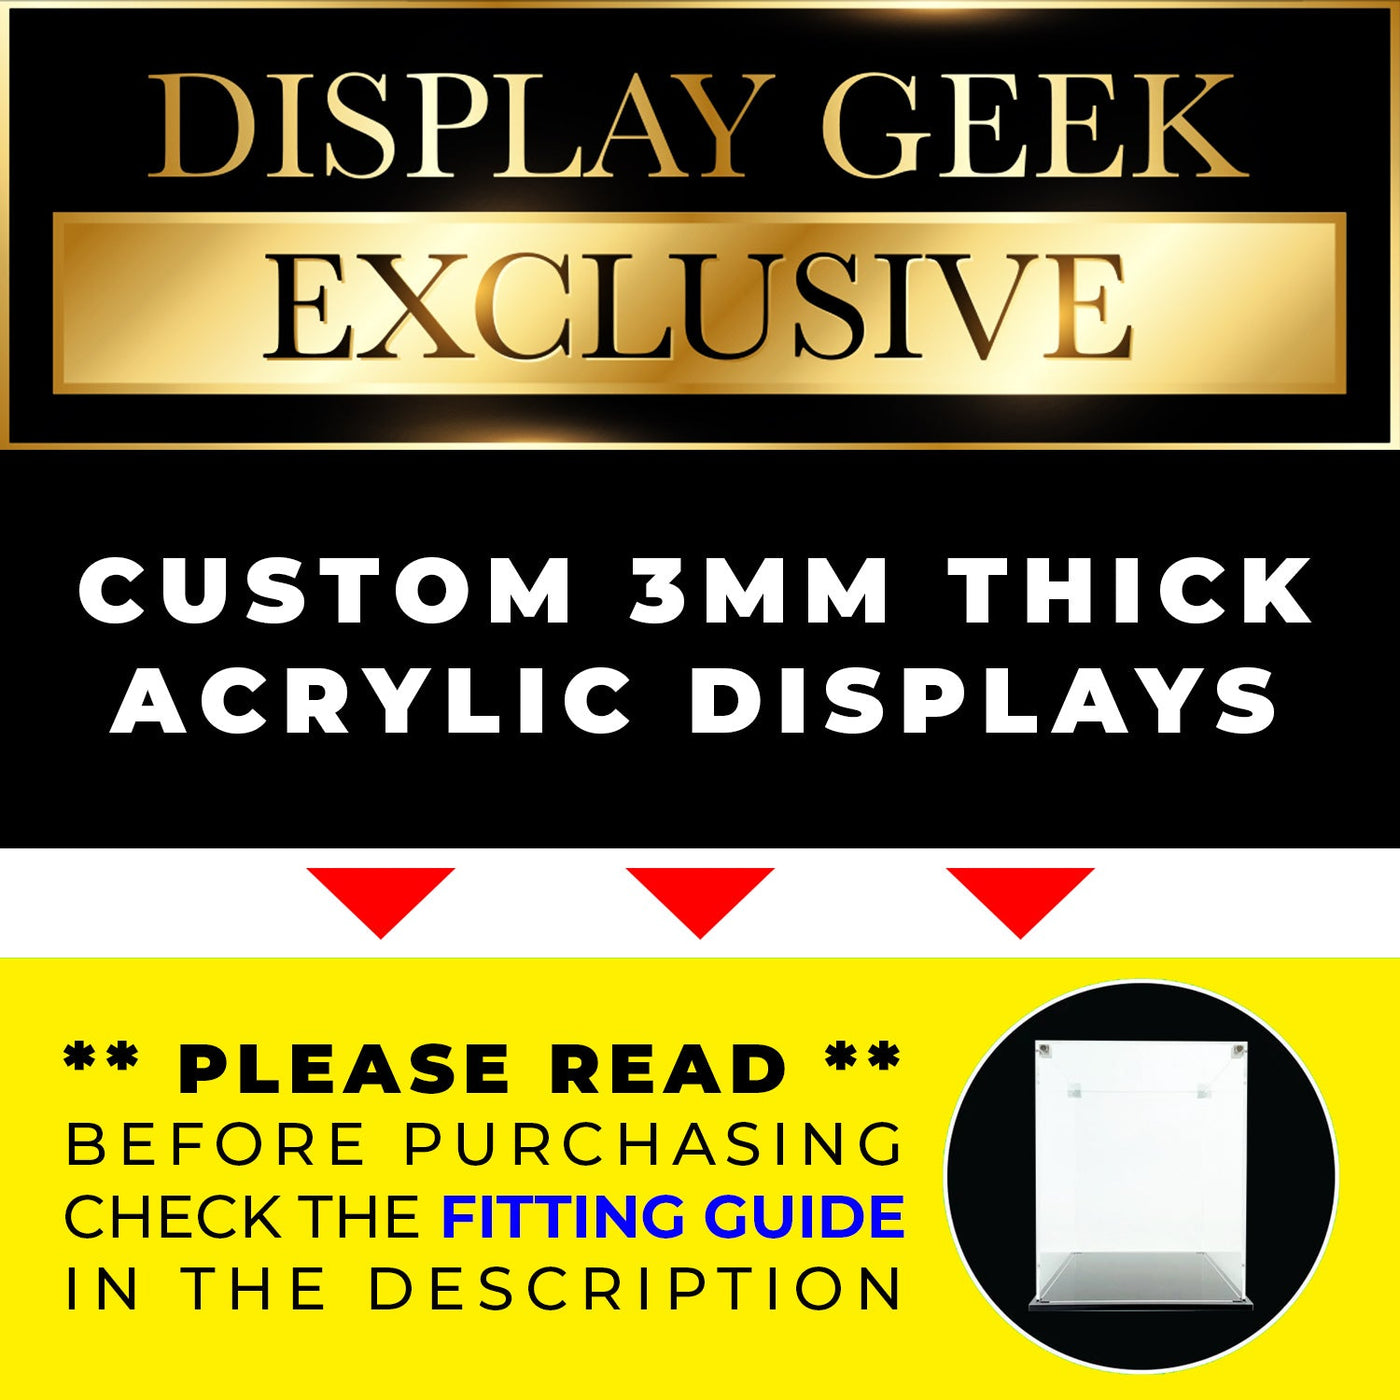 8.25h x 5w x 5.5d Funko Dorbz XL Custom Acrylic Display Case for Funko Pop Grails on The Protector Guide App by Display Geek